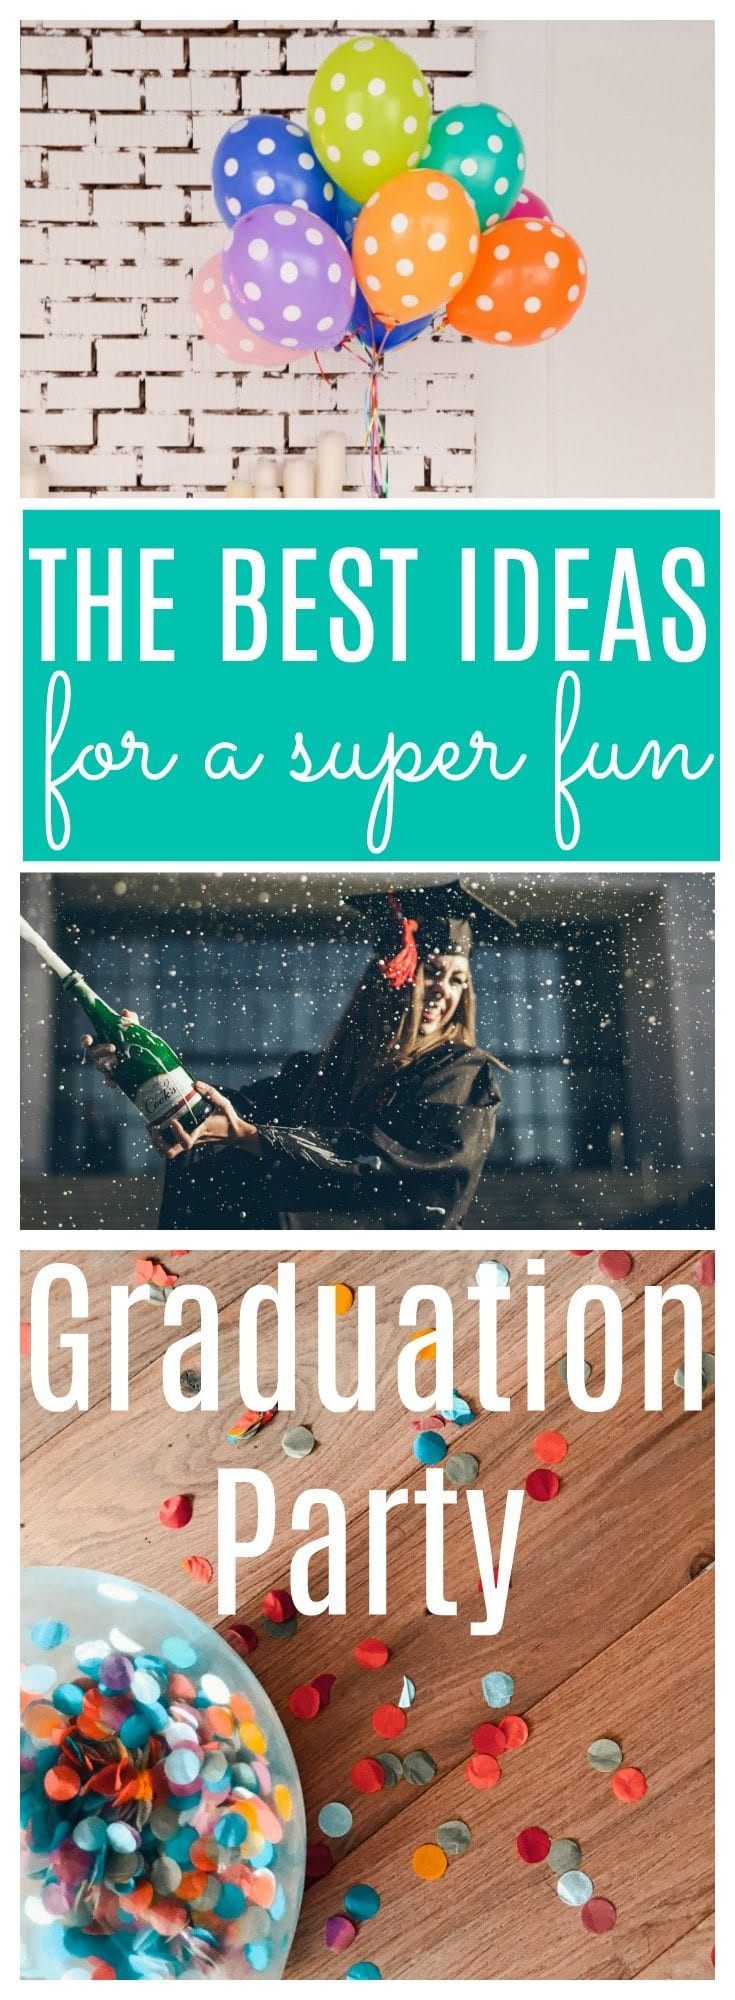 Combined Graduation Party Ideas
 Graduation Party Ideas How to Celebrate Your Senior s Big Day